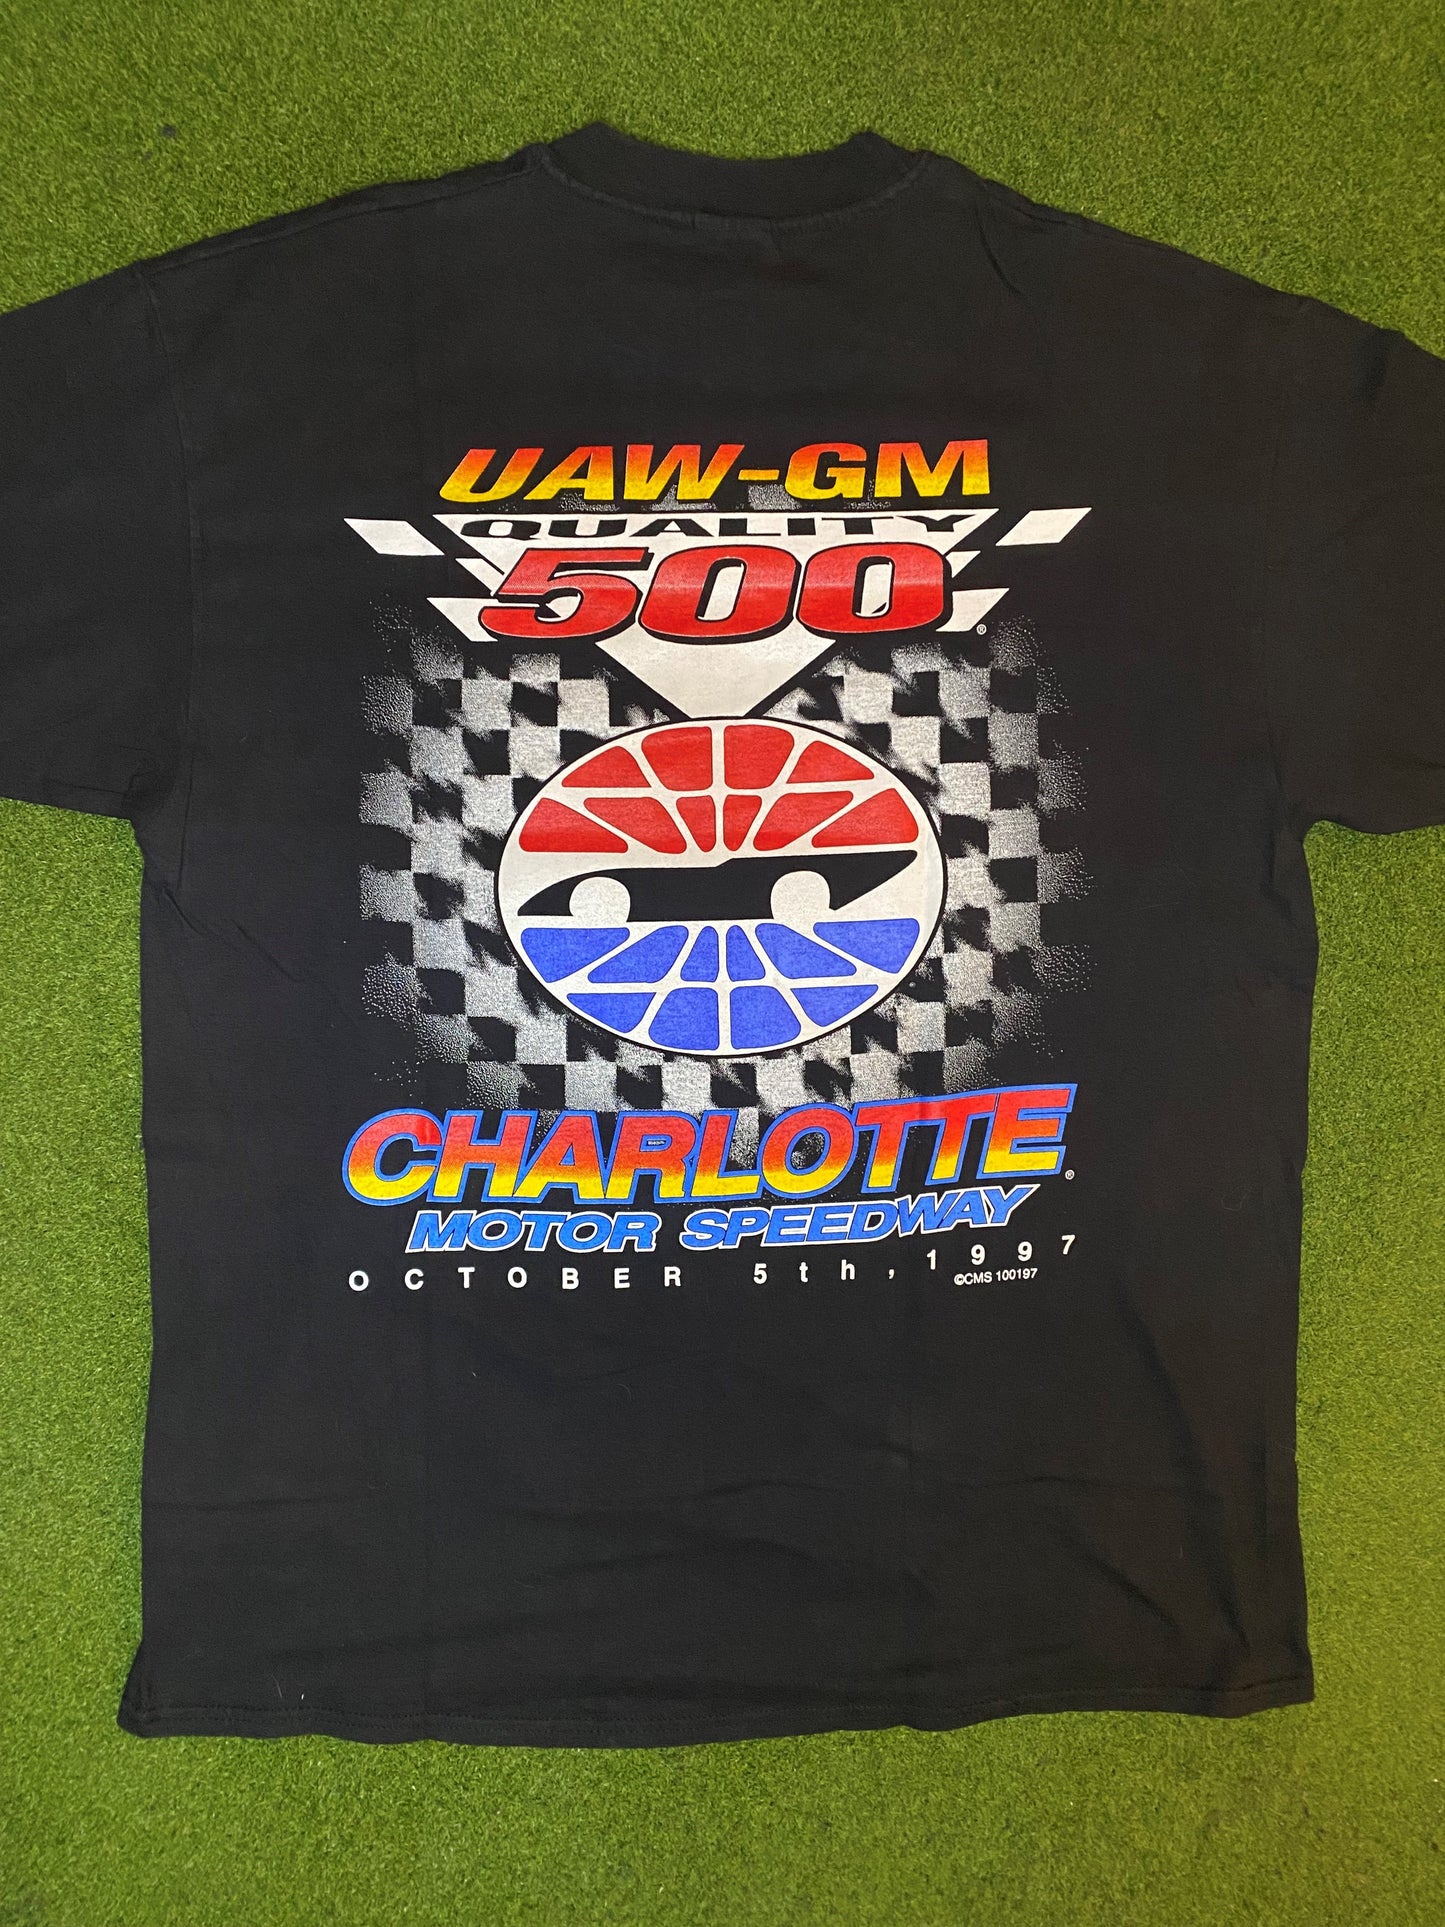 1997 Charlotte Motor Speedway - UAW-GM Quality 500 - Double Sided - Vintage NASCAR T-Shirt (XL)